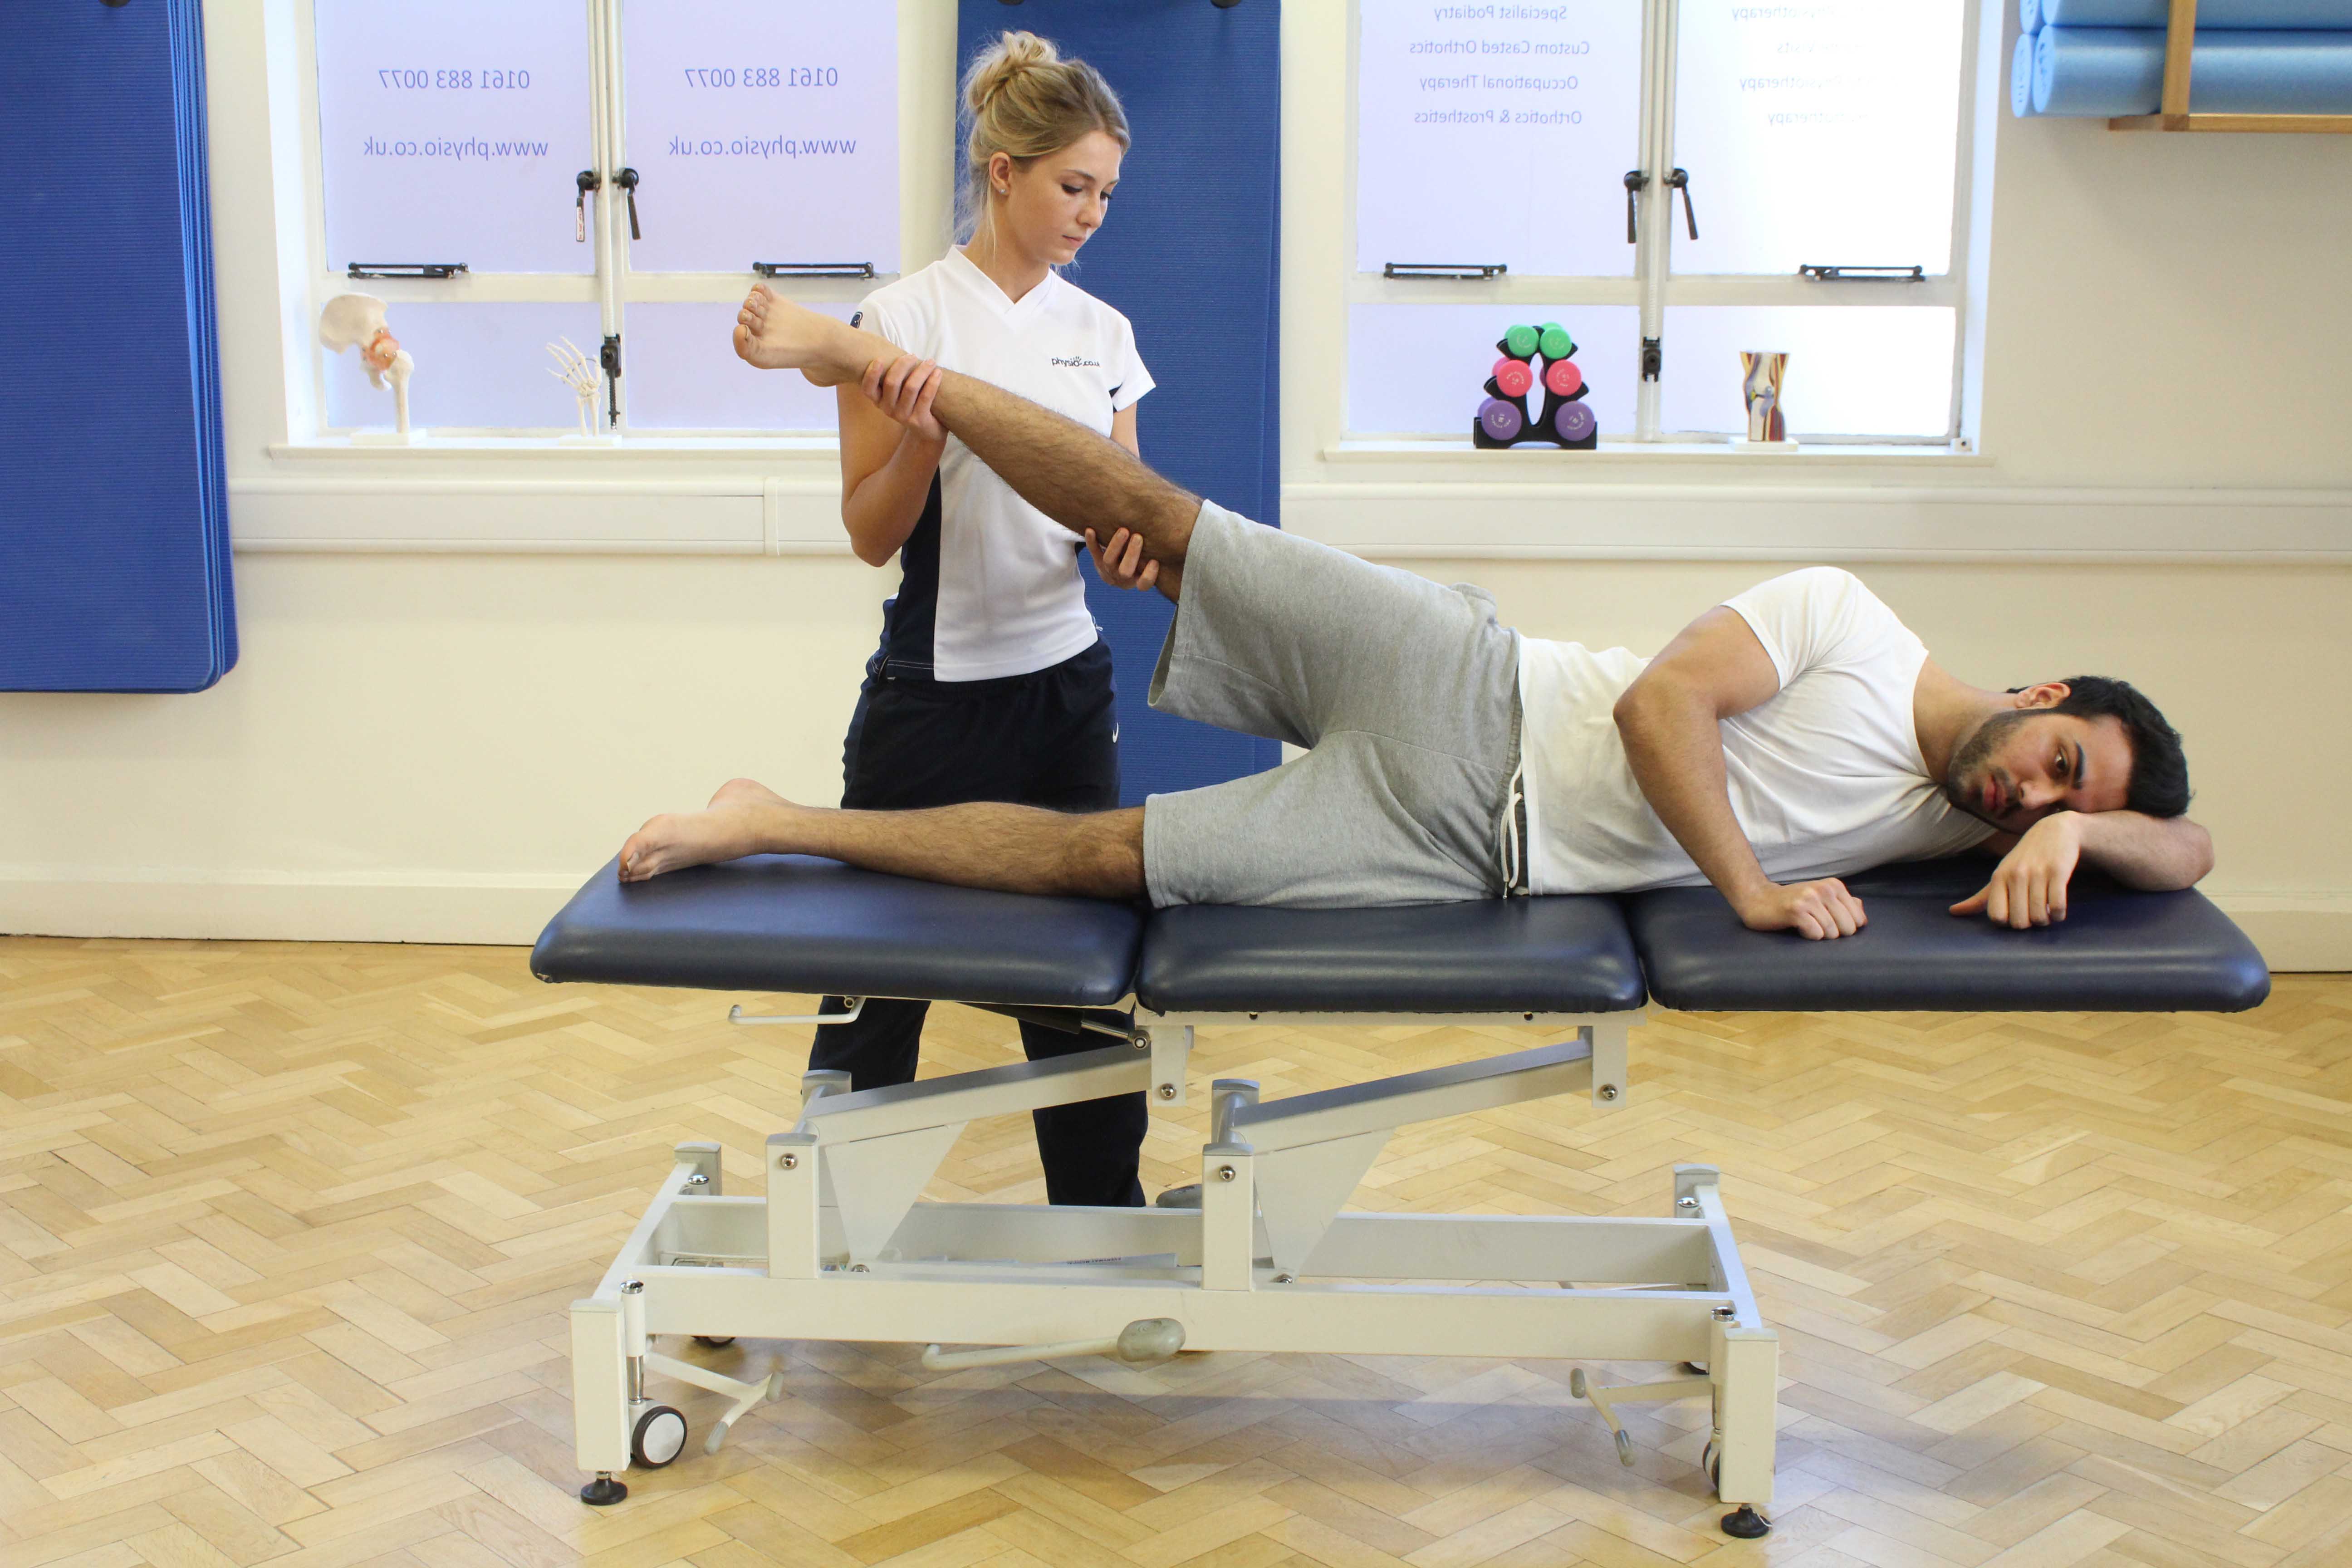 Core stability and proprioception exercises supervised by a neurological physiotherapist